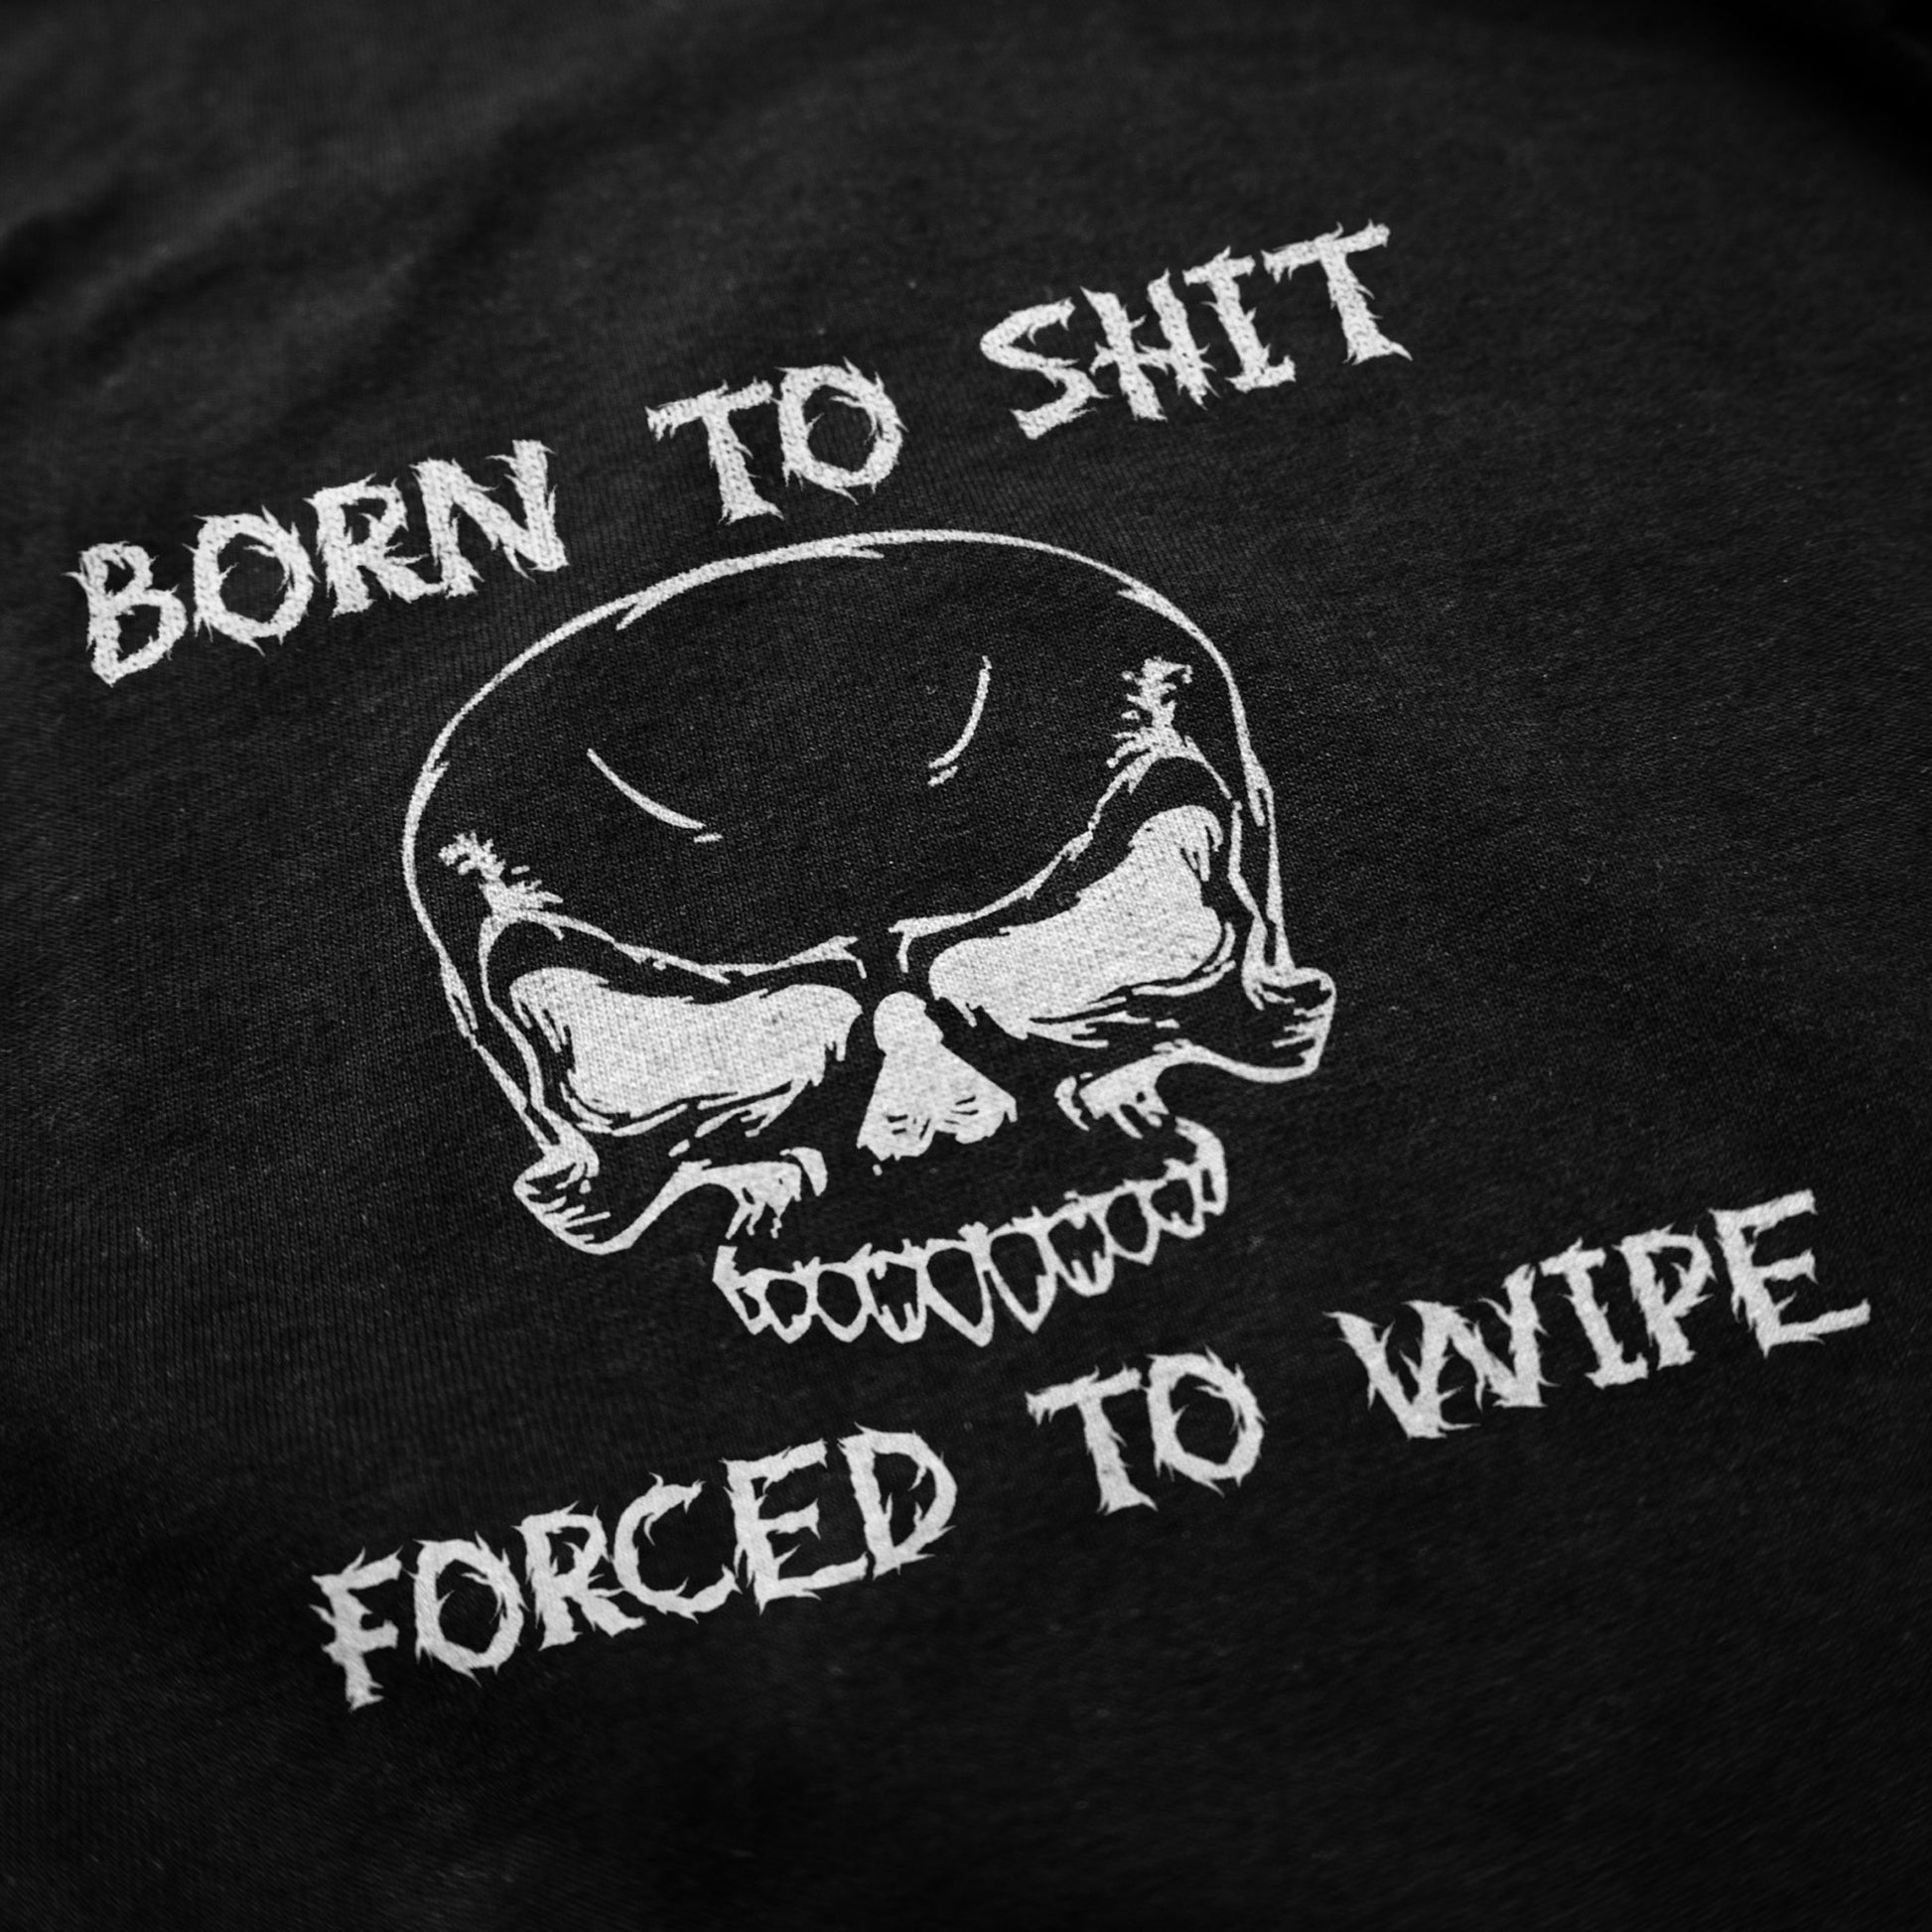 Forced To Wipe T Shirt - Shitheadsteve